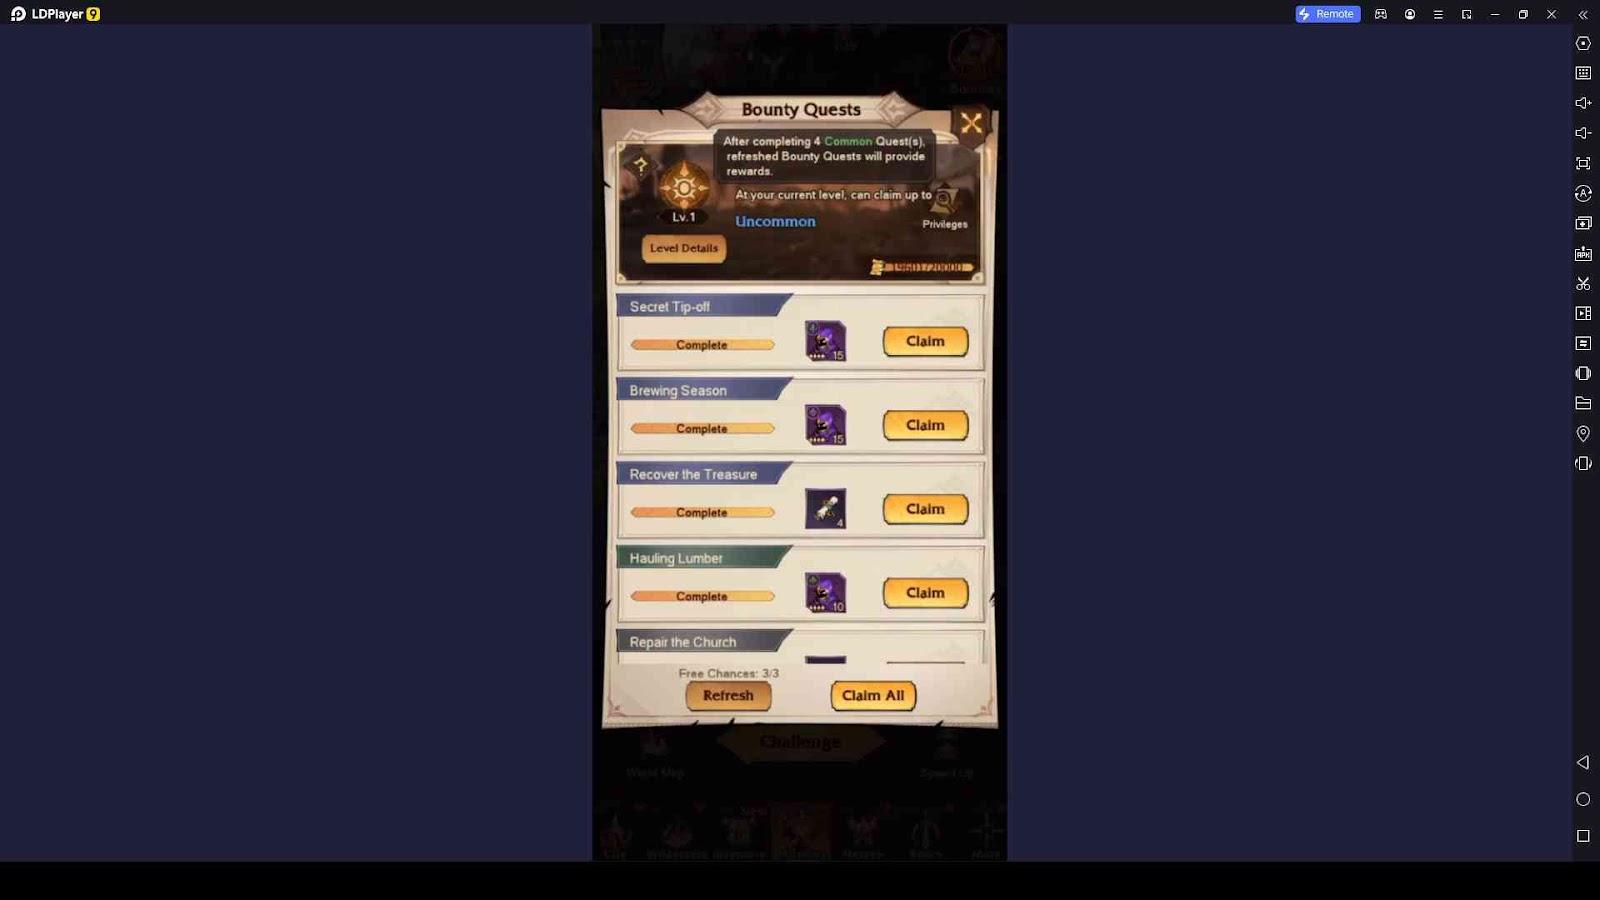 Complete the Bounty Quests